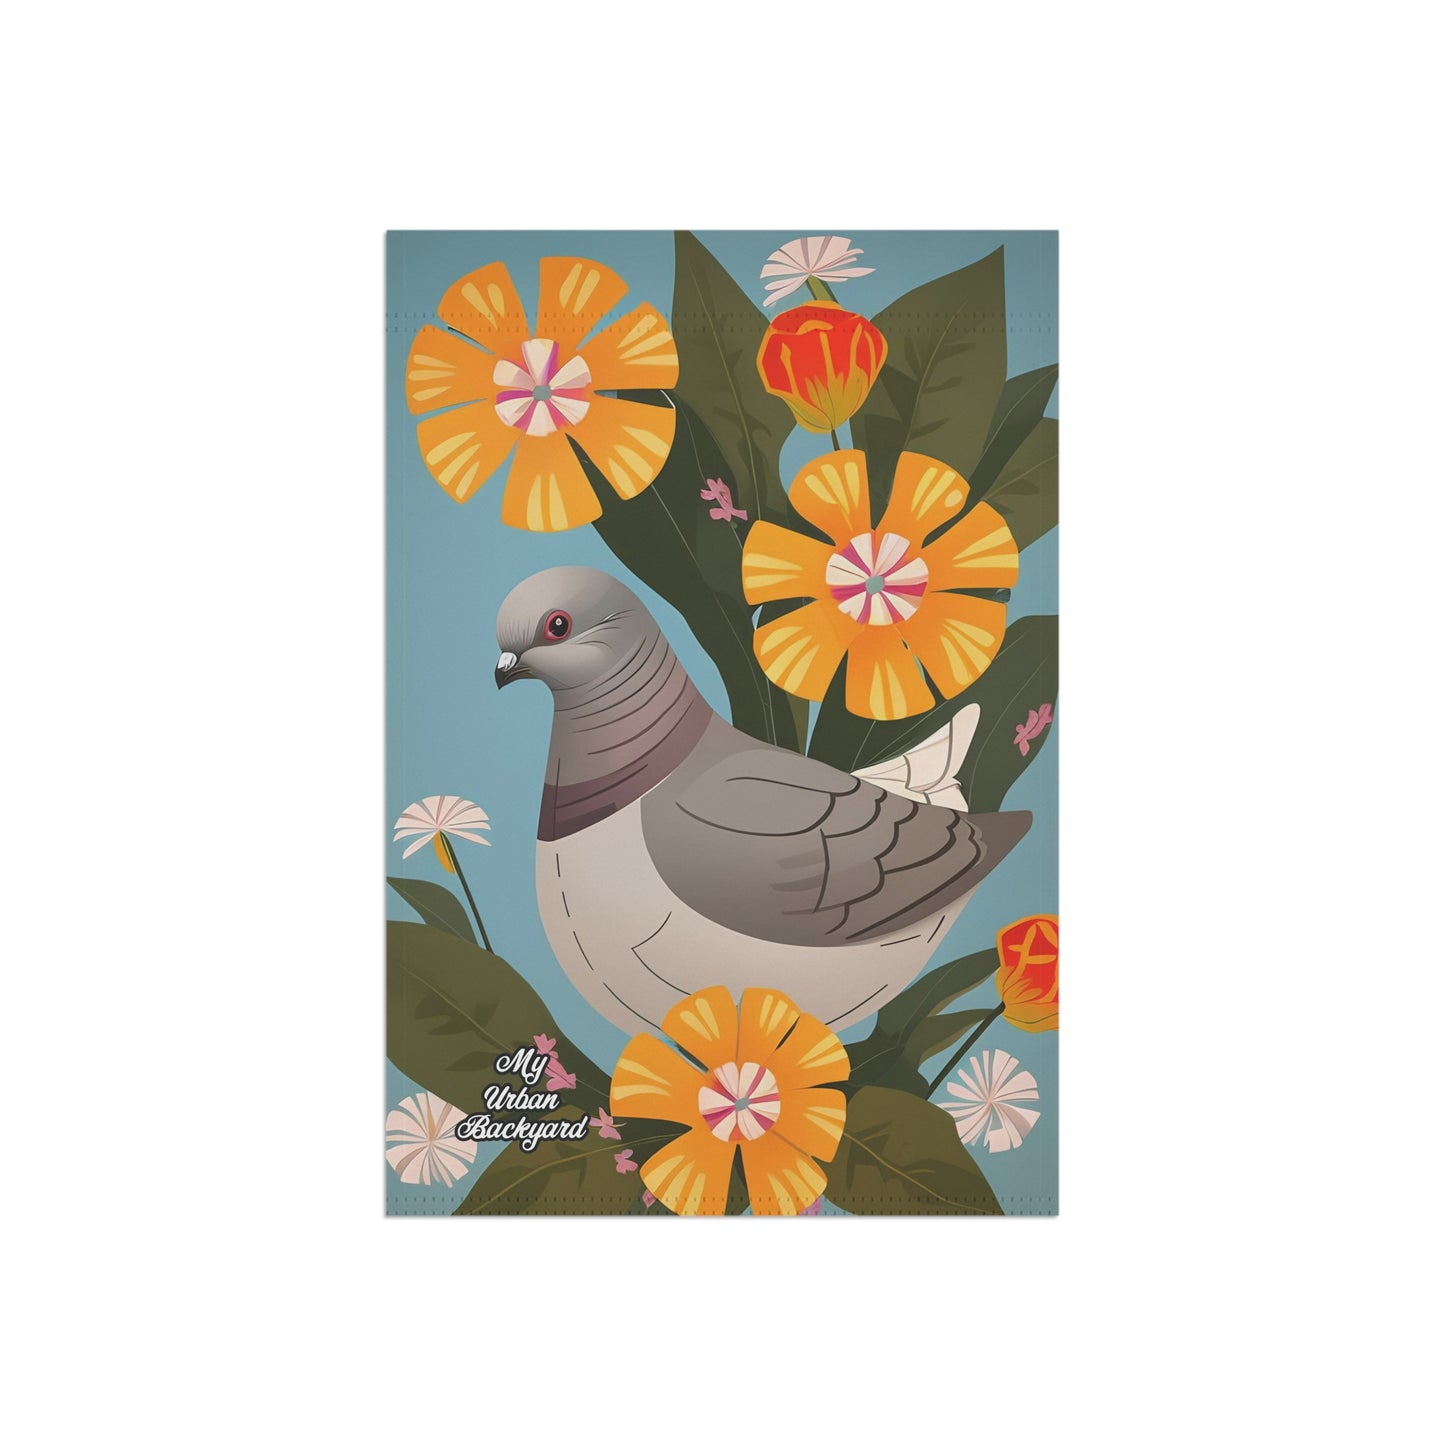 Pigeon and Flowers, Garden Flag for Yard, Patio, Porch, or Work, 12"x18" - Flag only